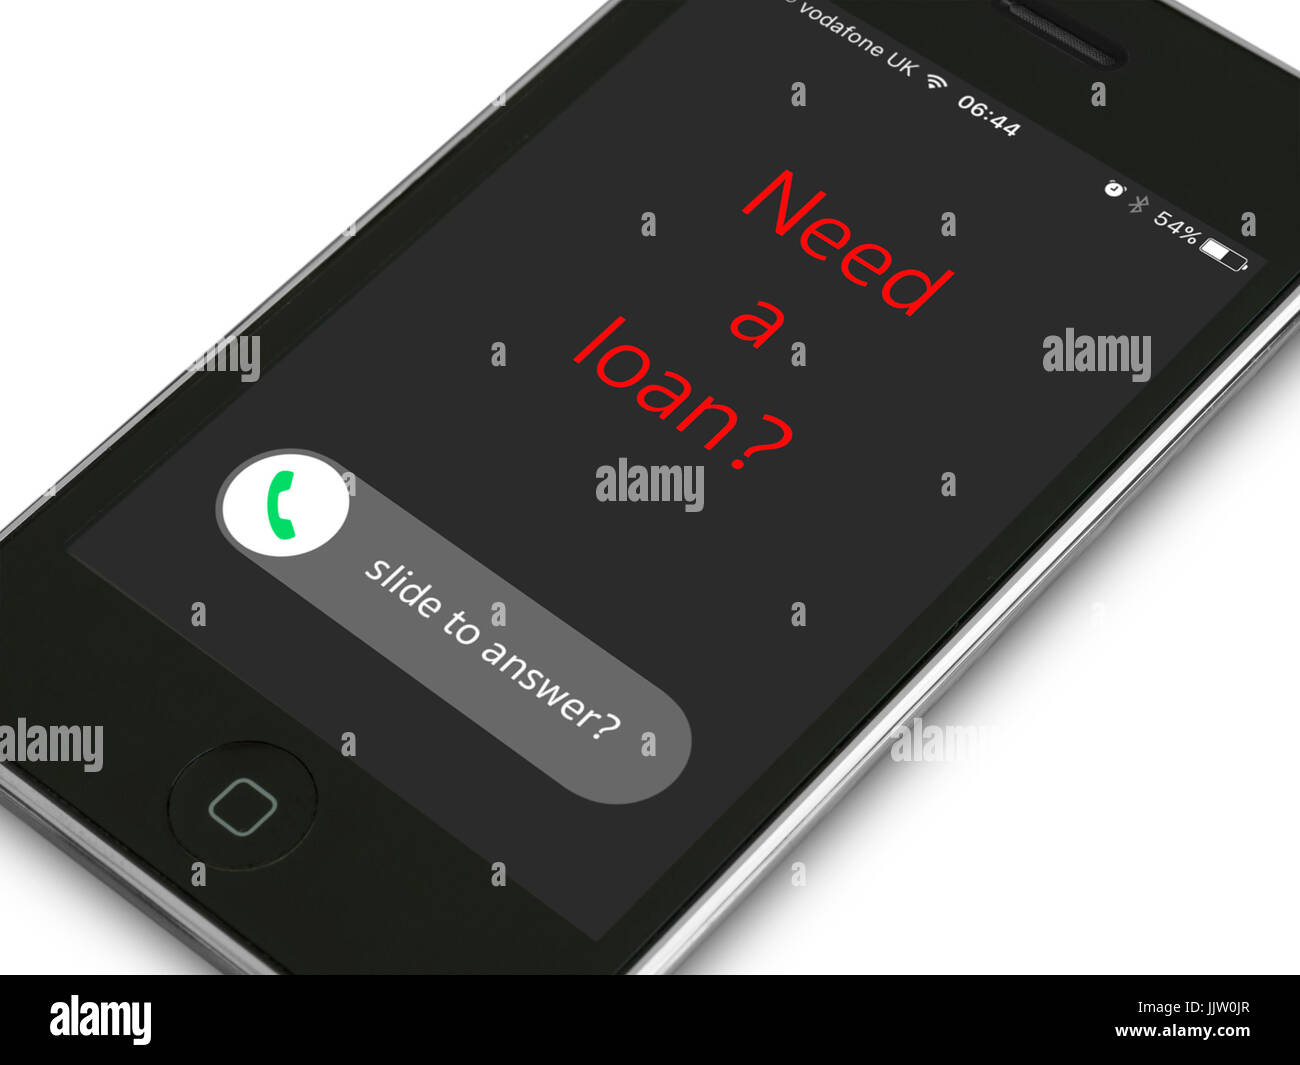 Concept image - Incoming cold call from loan provider on iPhone mobile phone display Stock Photo